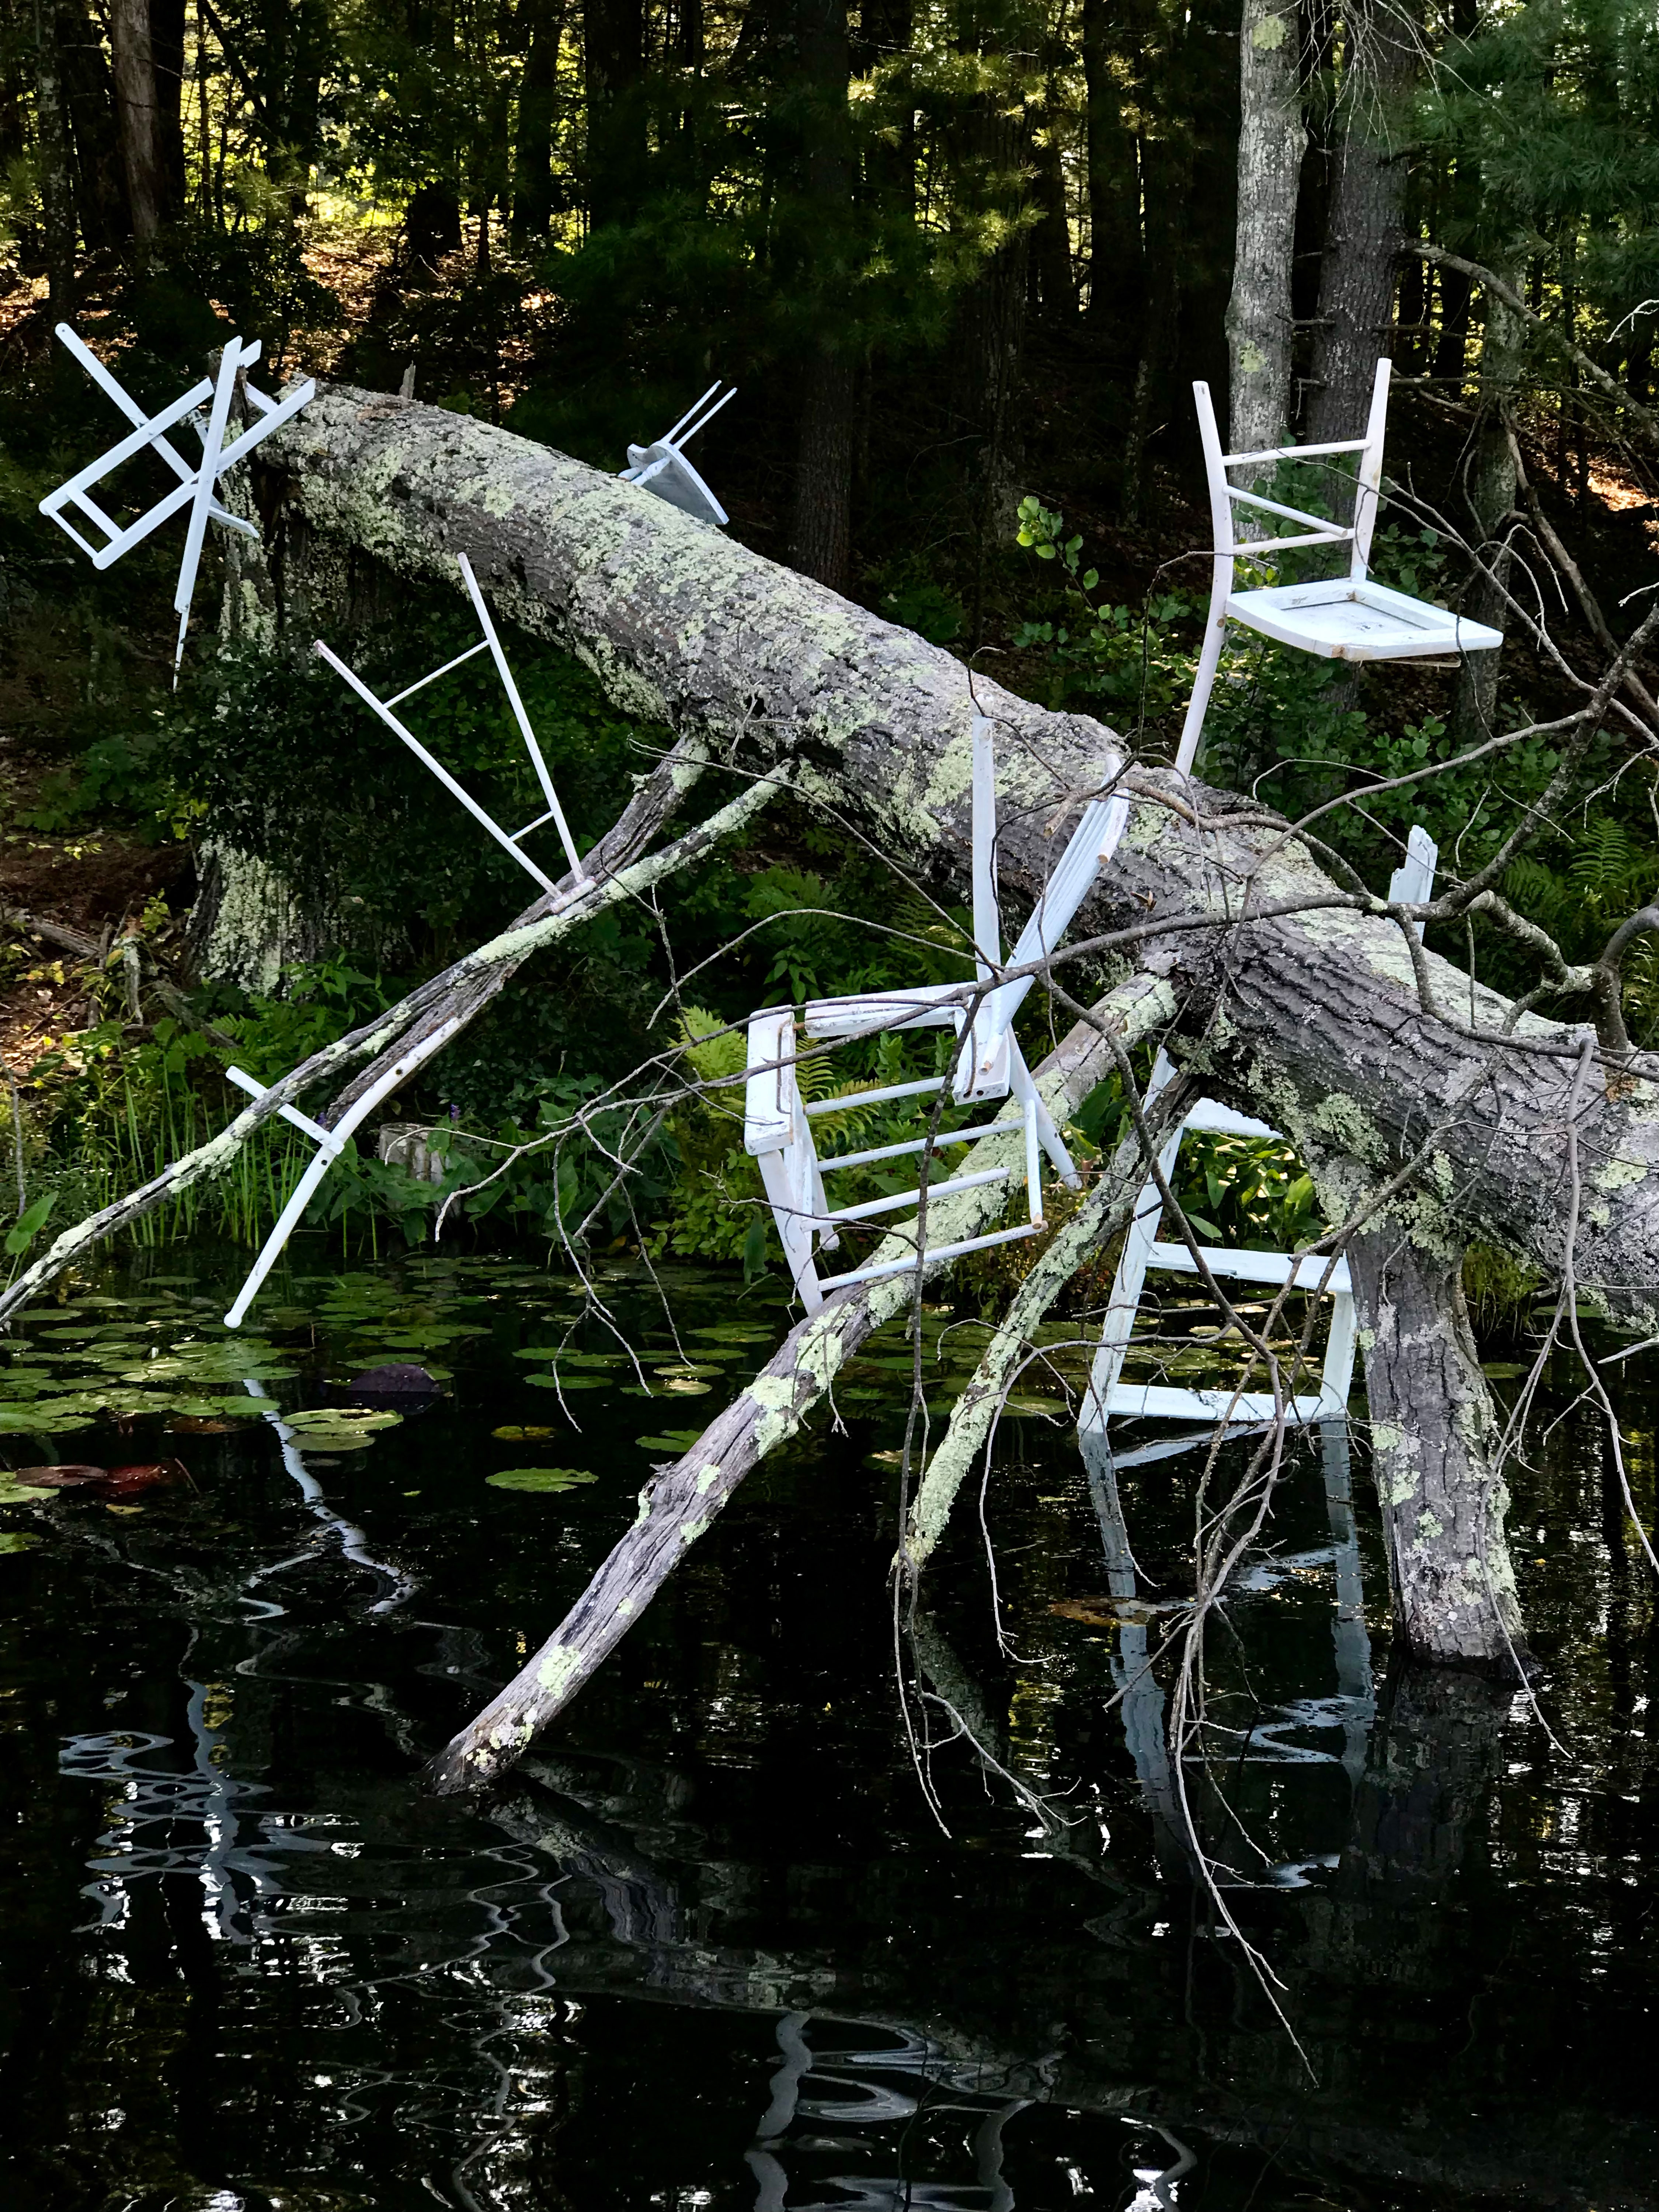 Photograph capturing a close-up of 'Metamorphic Reflections' by artist Caroline Coolidge. This detail reveals a massive tree trunk cutting diagonally from the upper left to the lower right, adorned with six white-painted wooden objects emerging from the fallen trunk, creating a bold contrast against the dark trees and water.